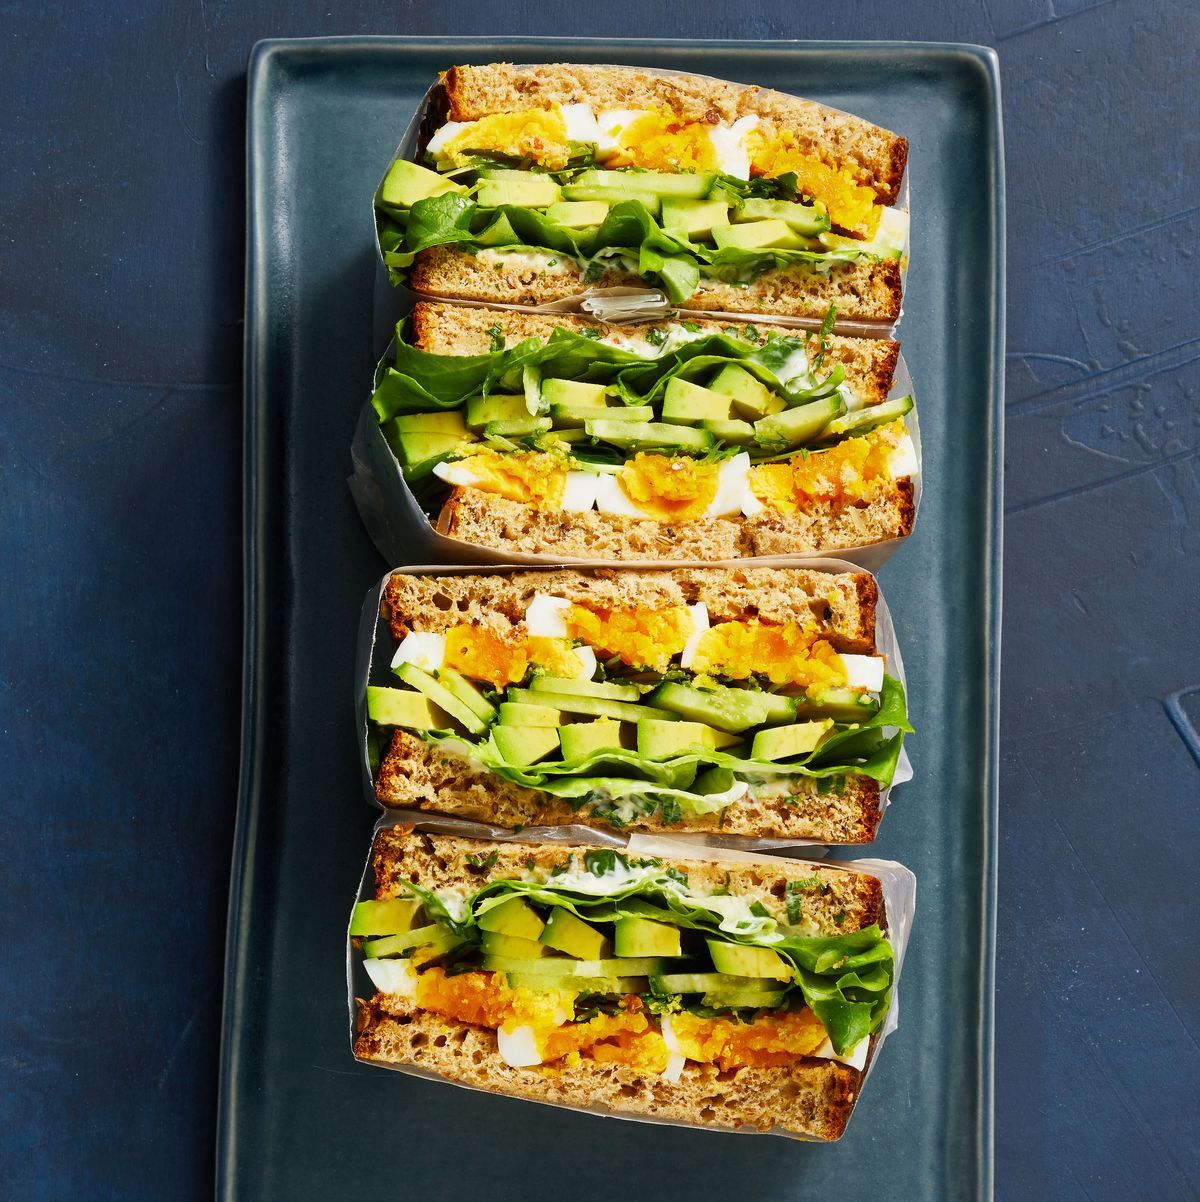 https://hips.hearstapps.com/hmg-prod/images/green-goddess-sandwiches-healthy-lunch-recipes-6552ad3197eef.jpg